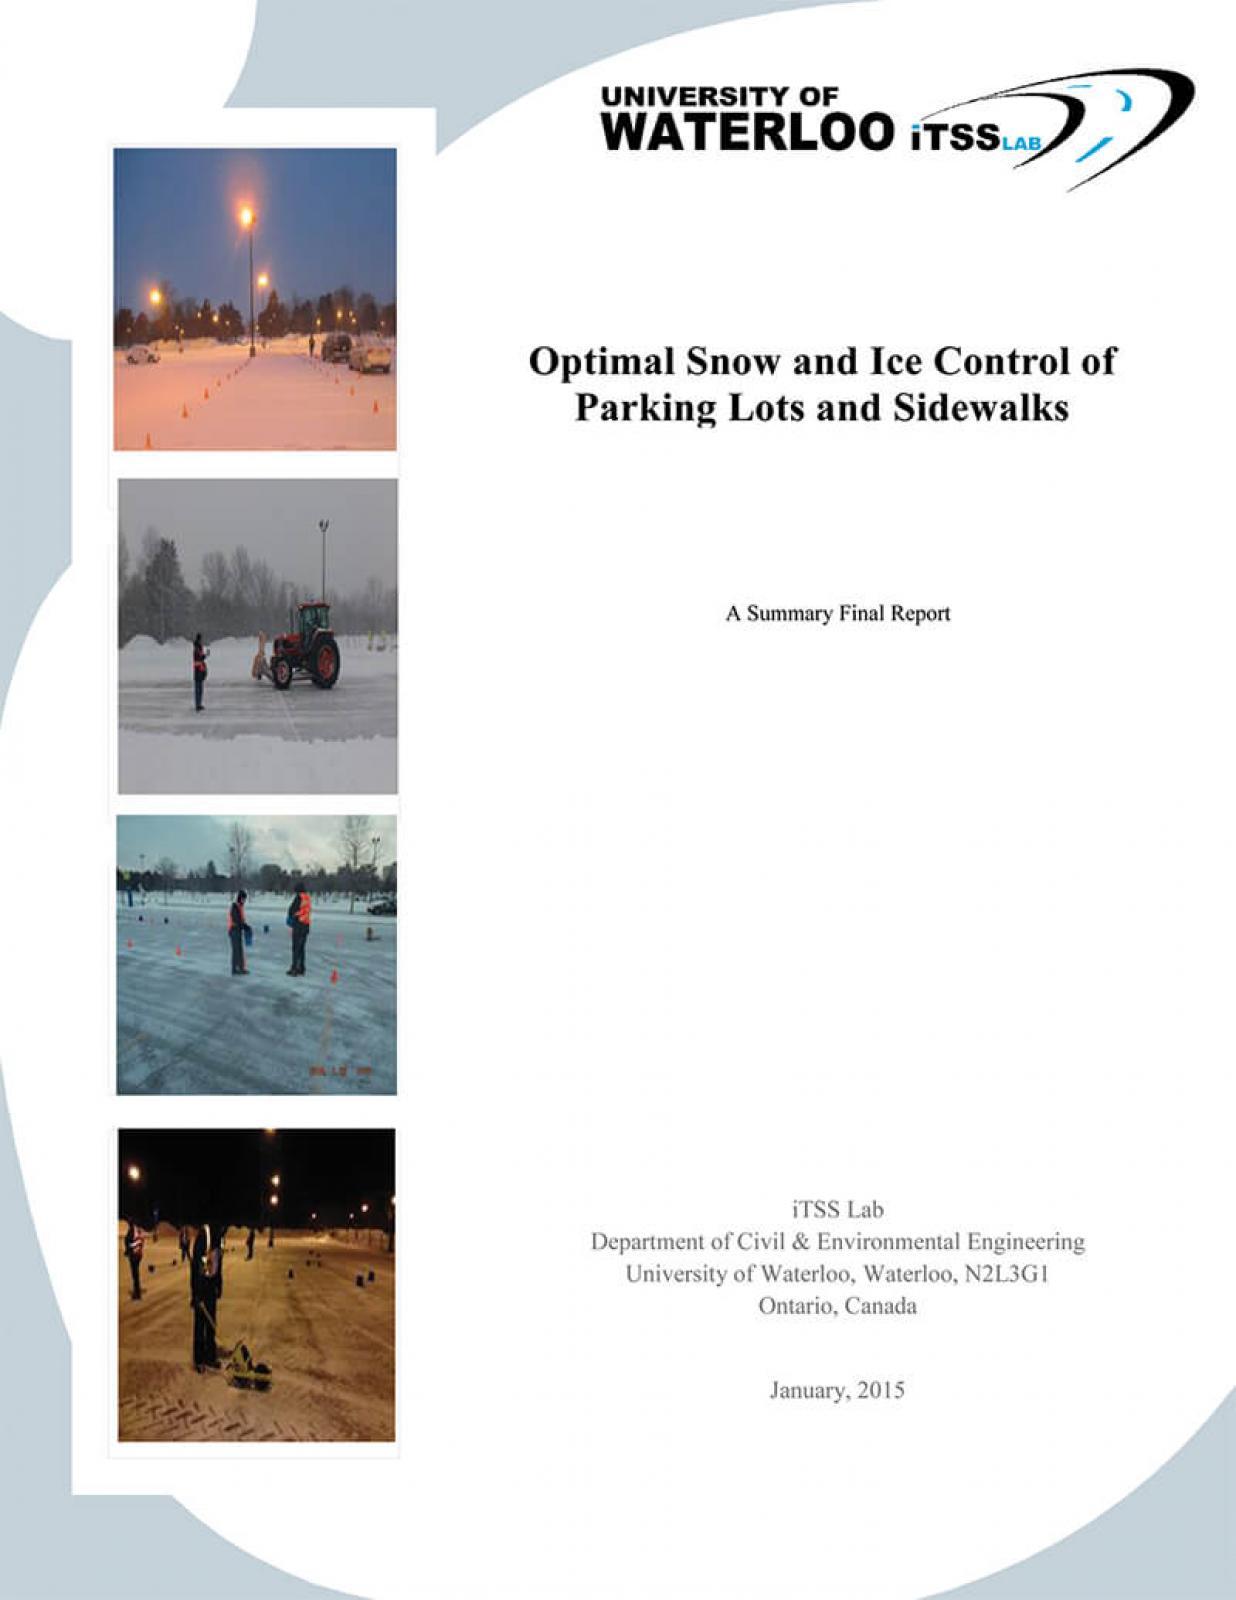 Snow and Ice Control for Parking Lots and Sidewalks summarizes three years of research.